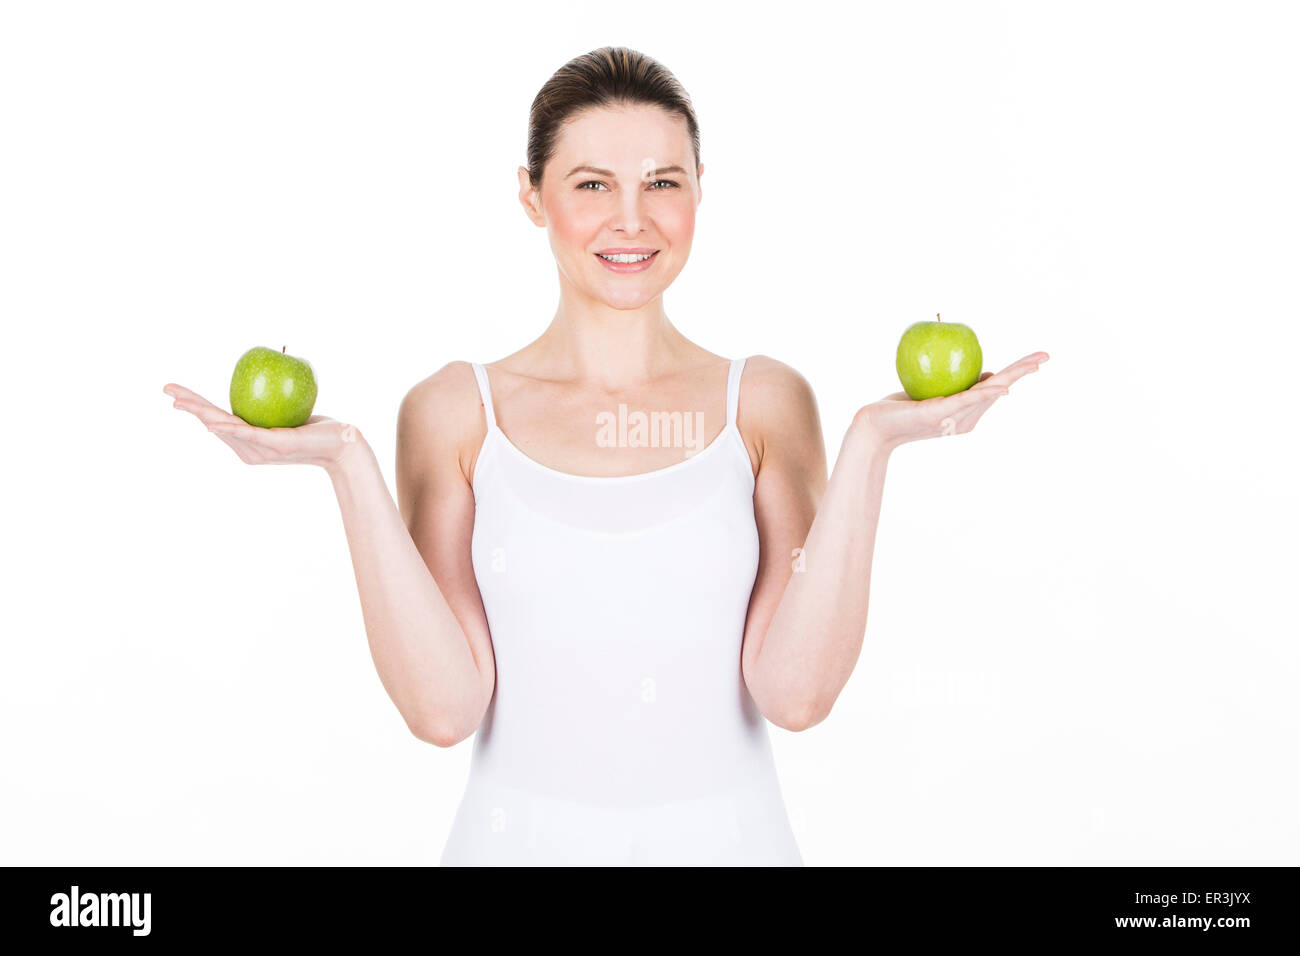 young woman holding two apples and looking at camera Stock Photo